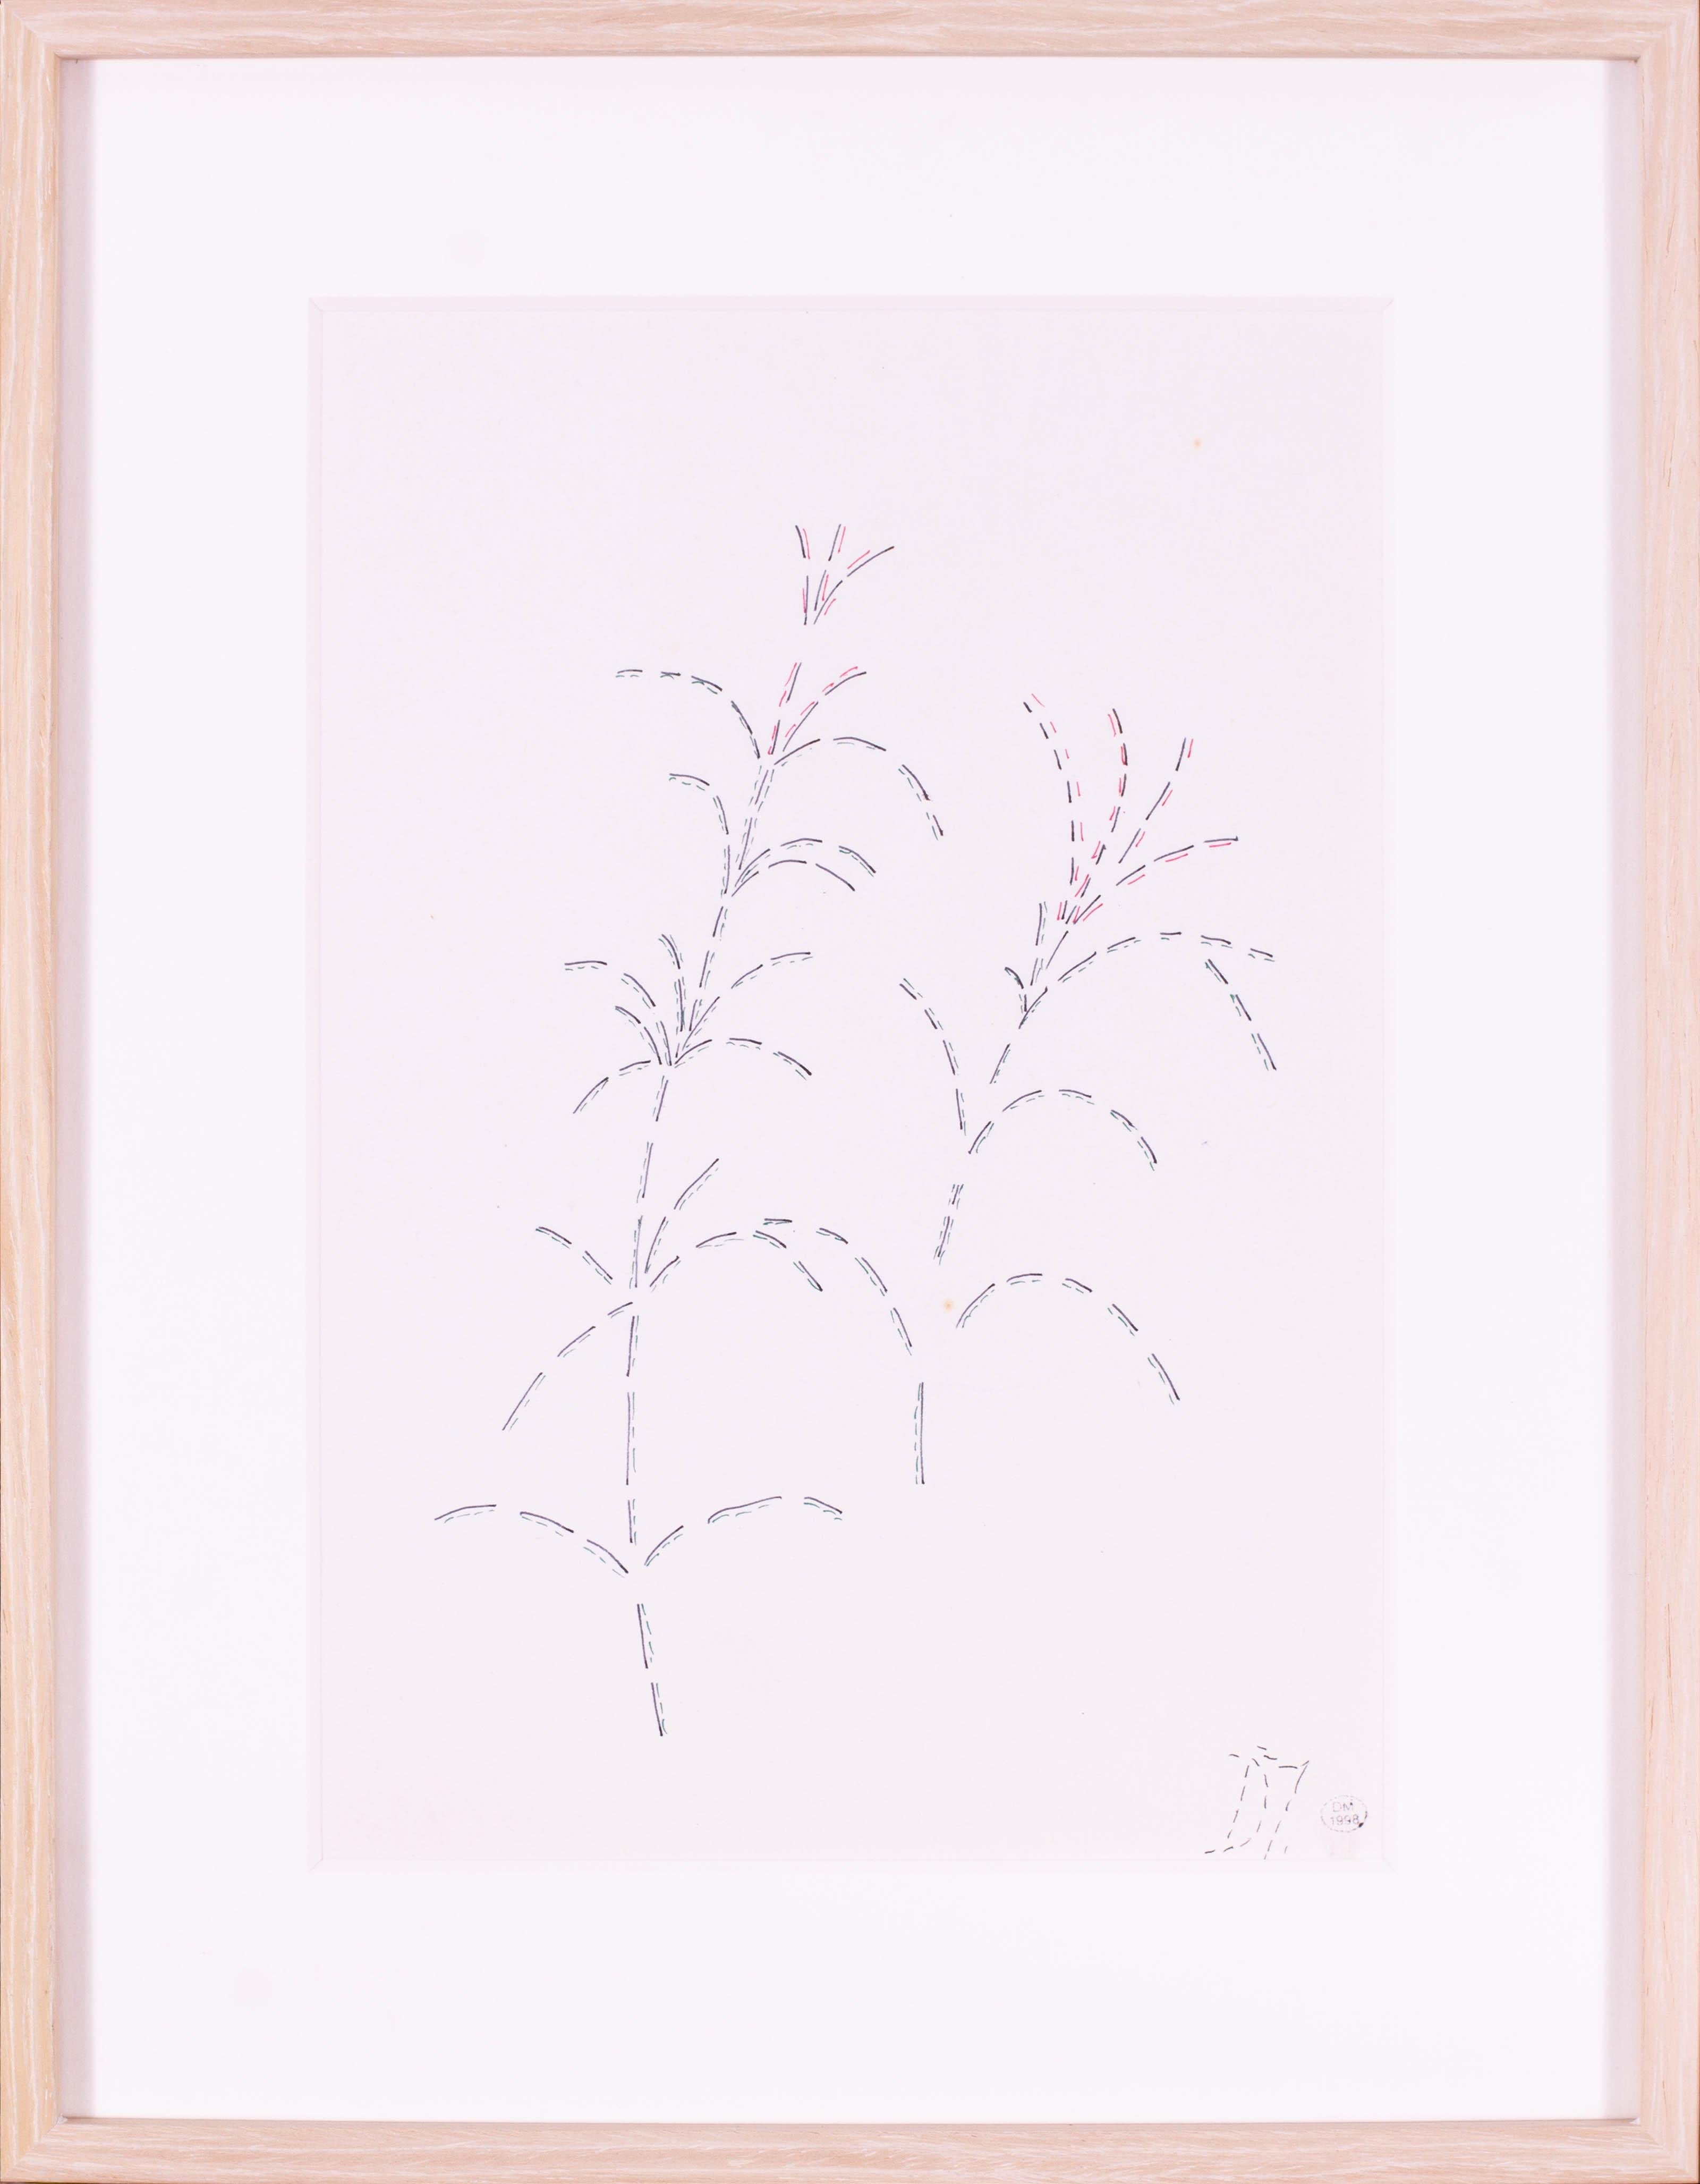 This is a beautiful and fine avant-garde finished drawing of herbs by the French female artist, Dora Maar.  Dora Maar was a distinctive artist in her own right marked by striking photography, innovative techniques, and an unwavering exploration of